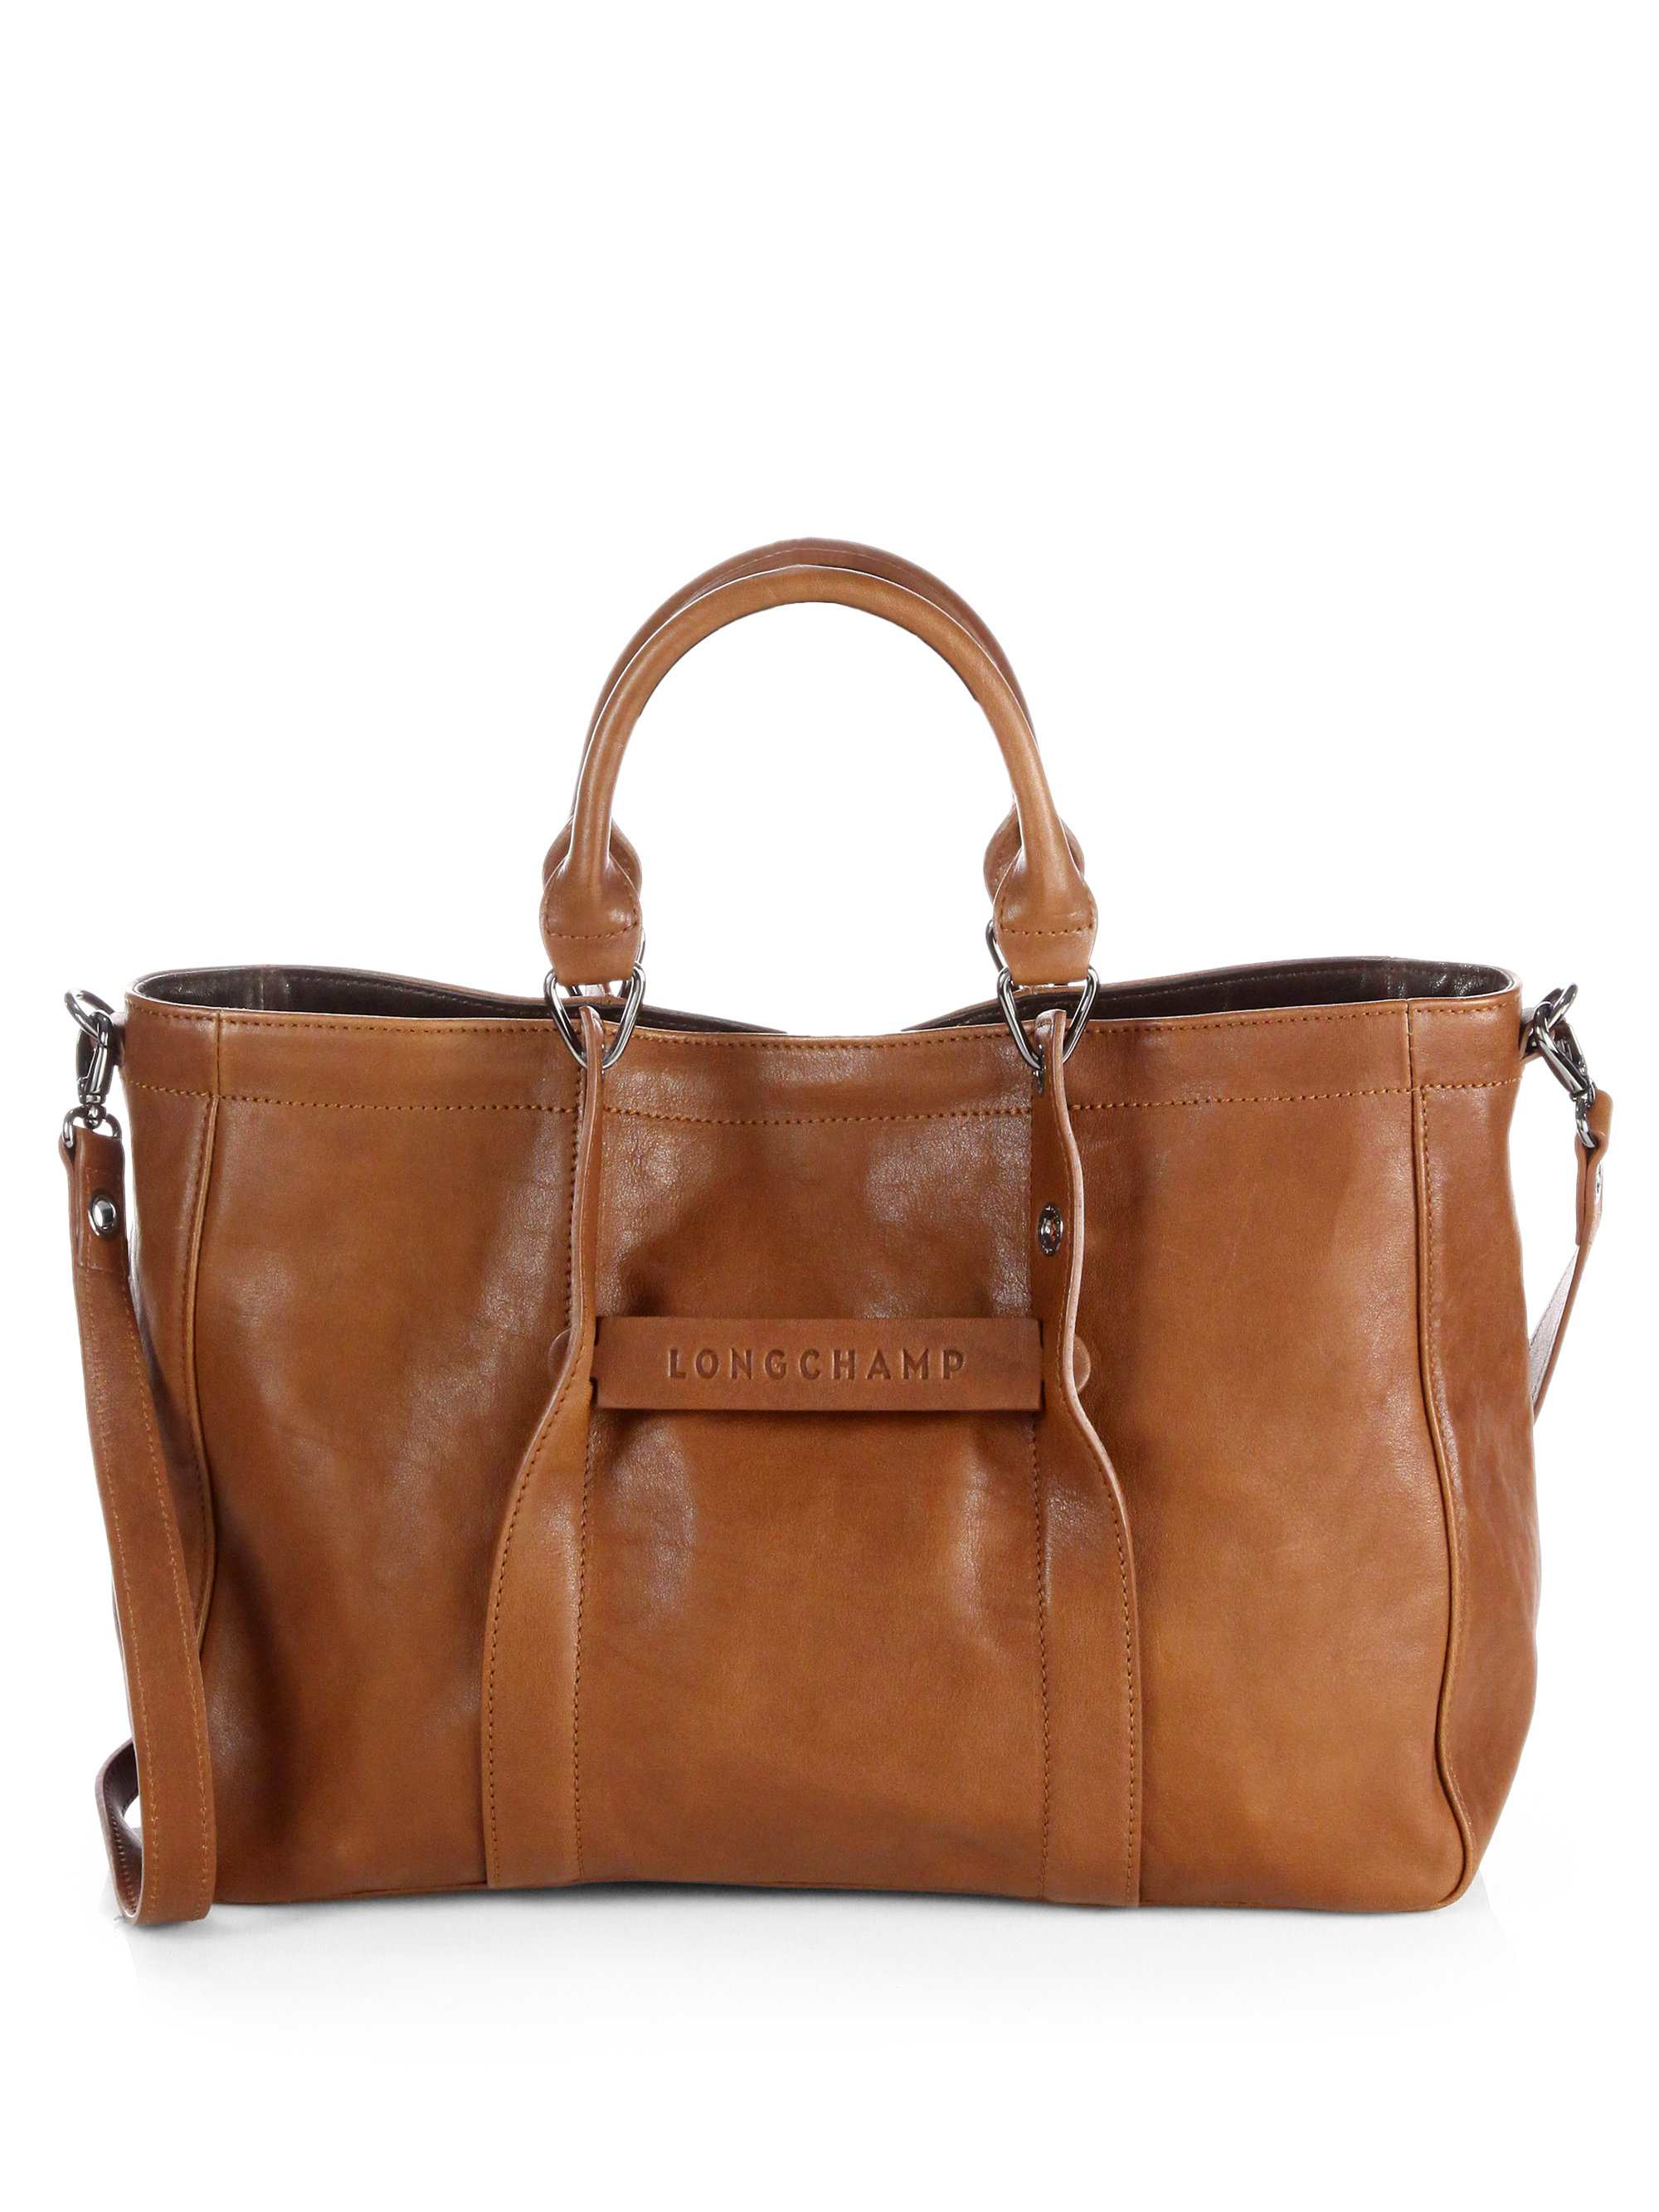 Longchamp Small Leather Tote Bag in Brown (COGNAC) | Lyst